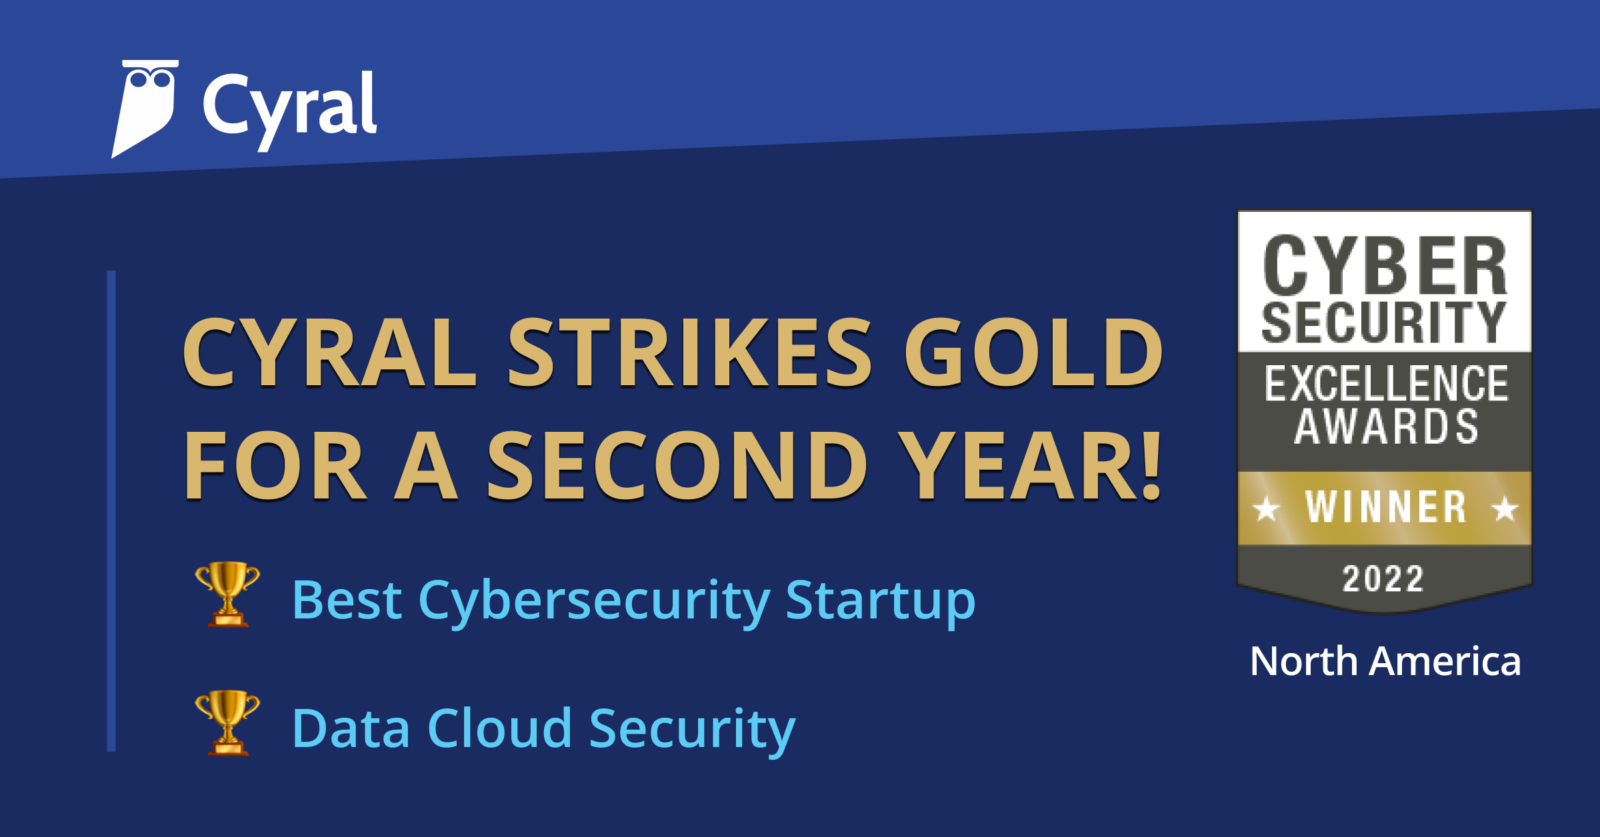 White cyral owl logo in top left corner, gold text below reads,"Cyral strikes gold for second year!" in all caps, a small gold trophy emoji next to text that reads, "Best Cybersecurity Startup" North America, a Cyber Security Excellence Award Badge for Gold Winners to the right